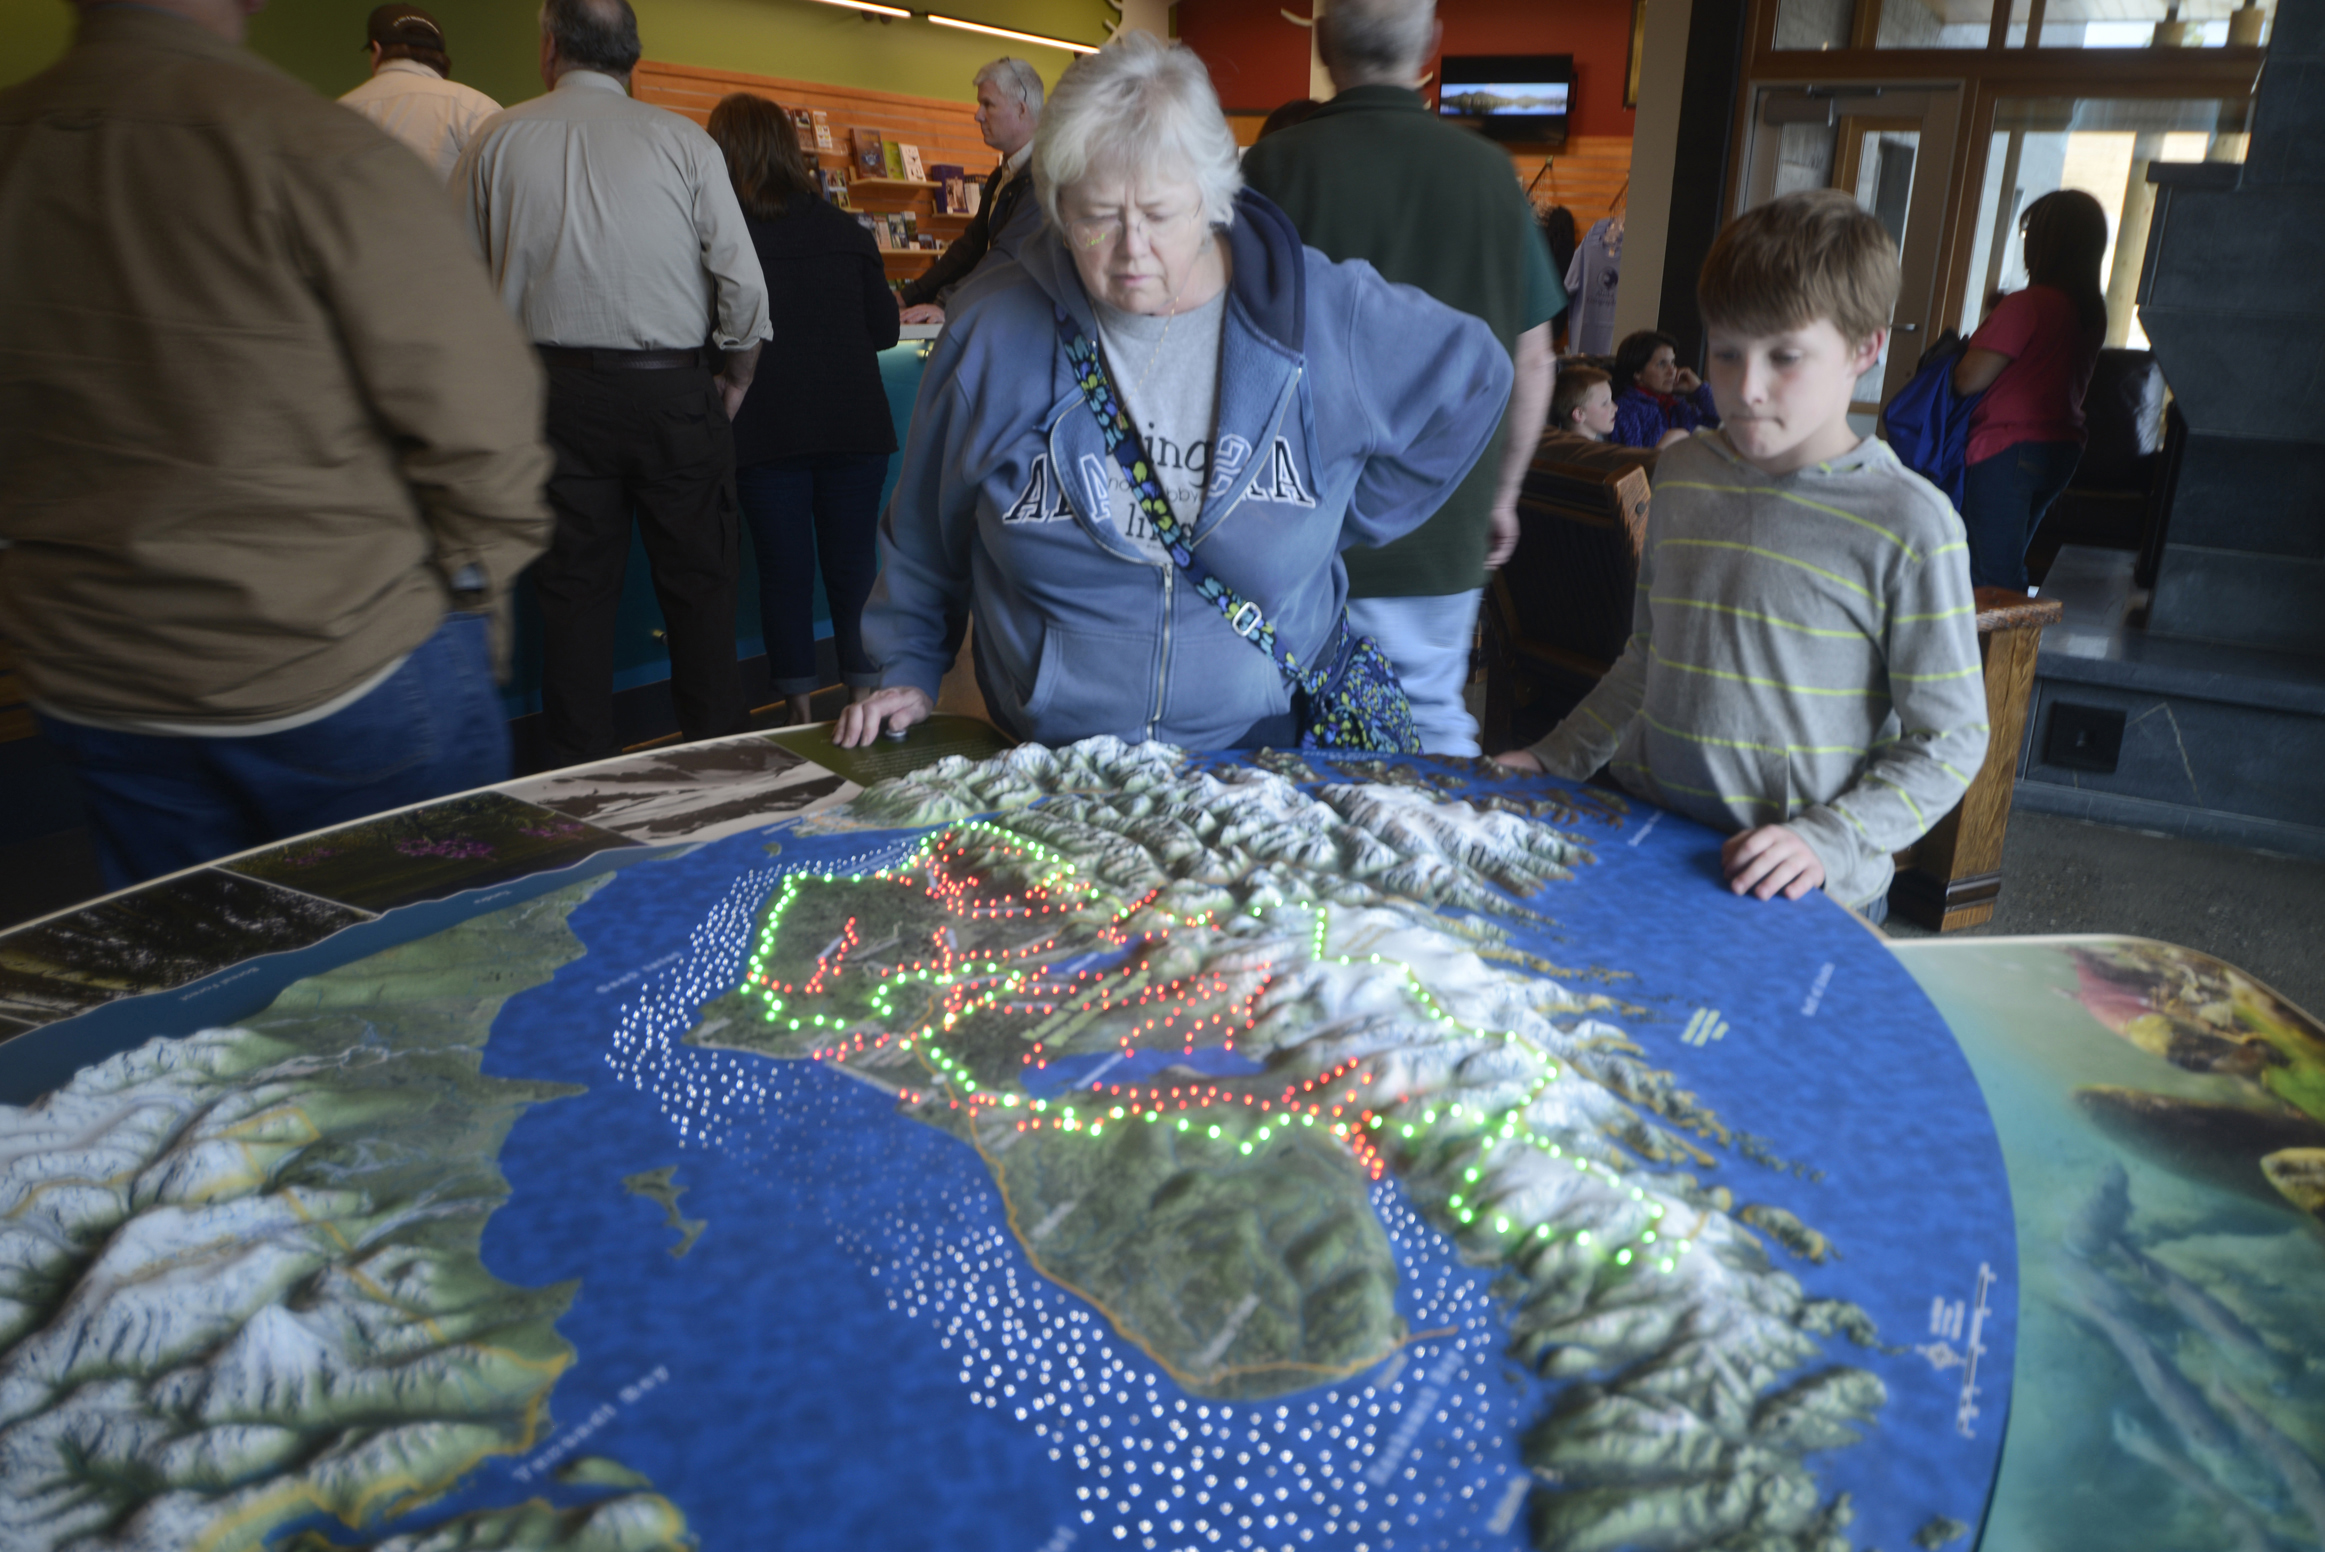 A display at the new Kenai Wildlife Refuge Visitor’s Center shows the Kenai Peninsula’s anadromous streams in red lights and the borders of the Kenai Wildlife Refuge in green. The new visitor center opened Friday in Soldotna.-Ben Boettger, Morris News Service - Alaska